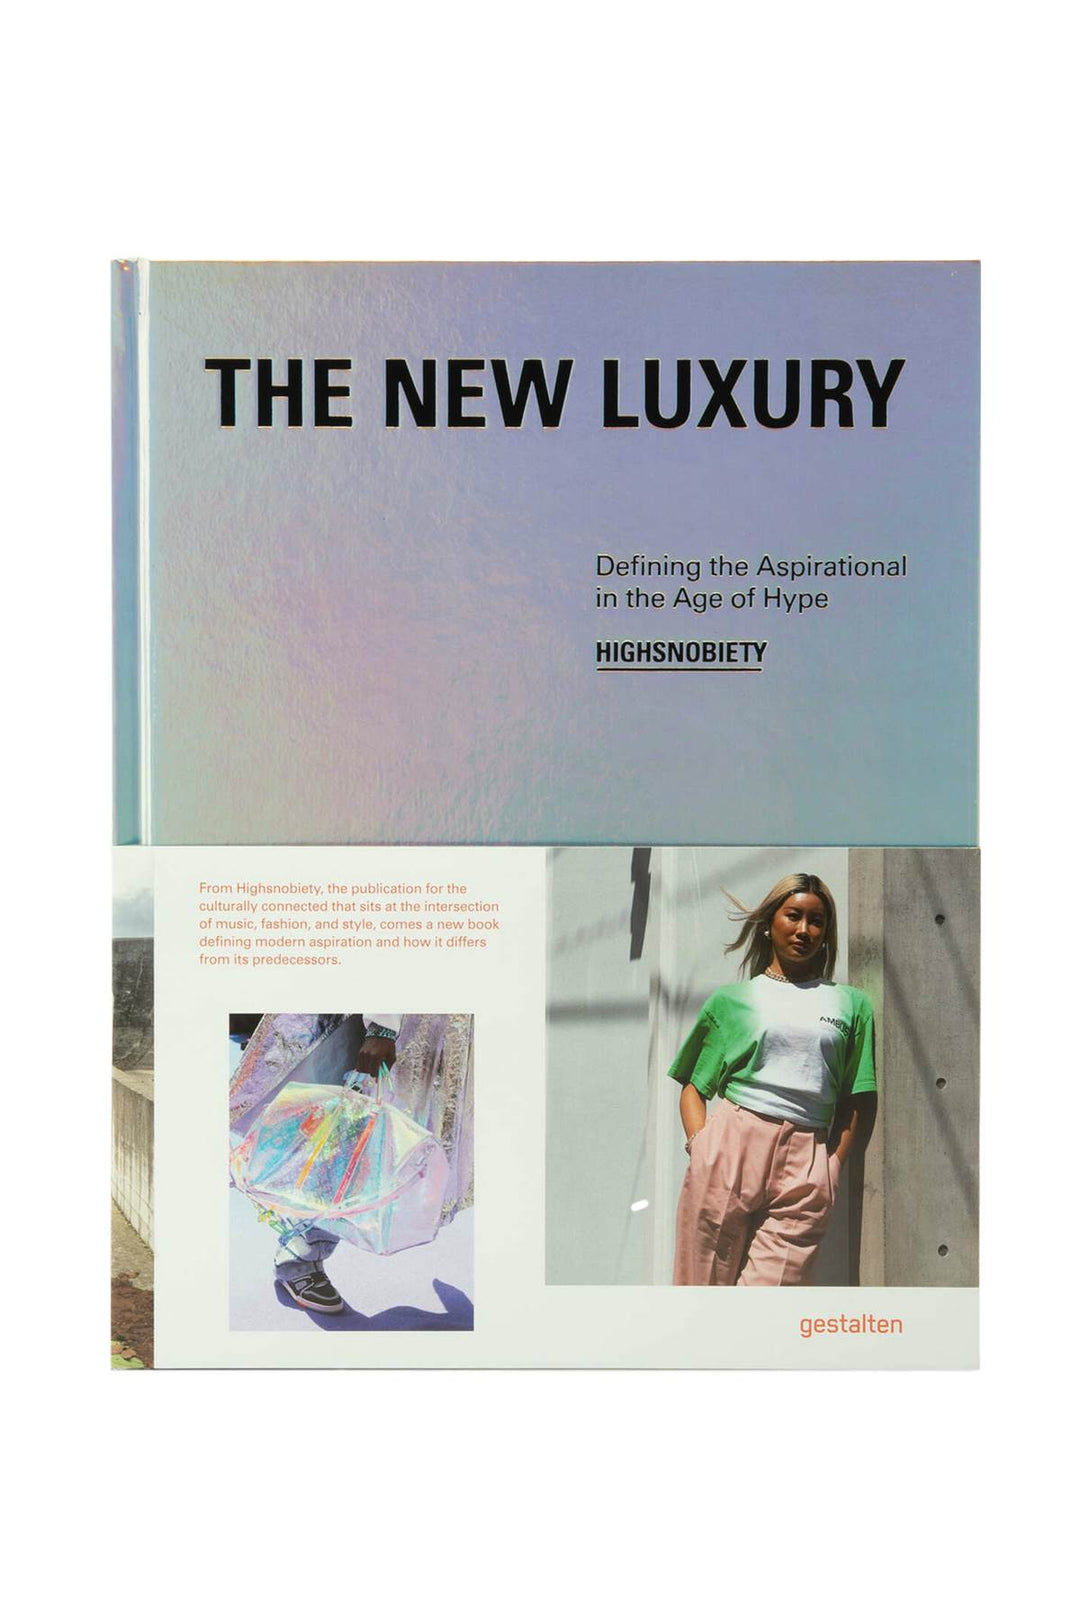 New mags the new luxury - highsnobiety: defining the aspirational in the age of hype-2